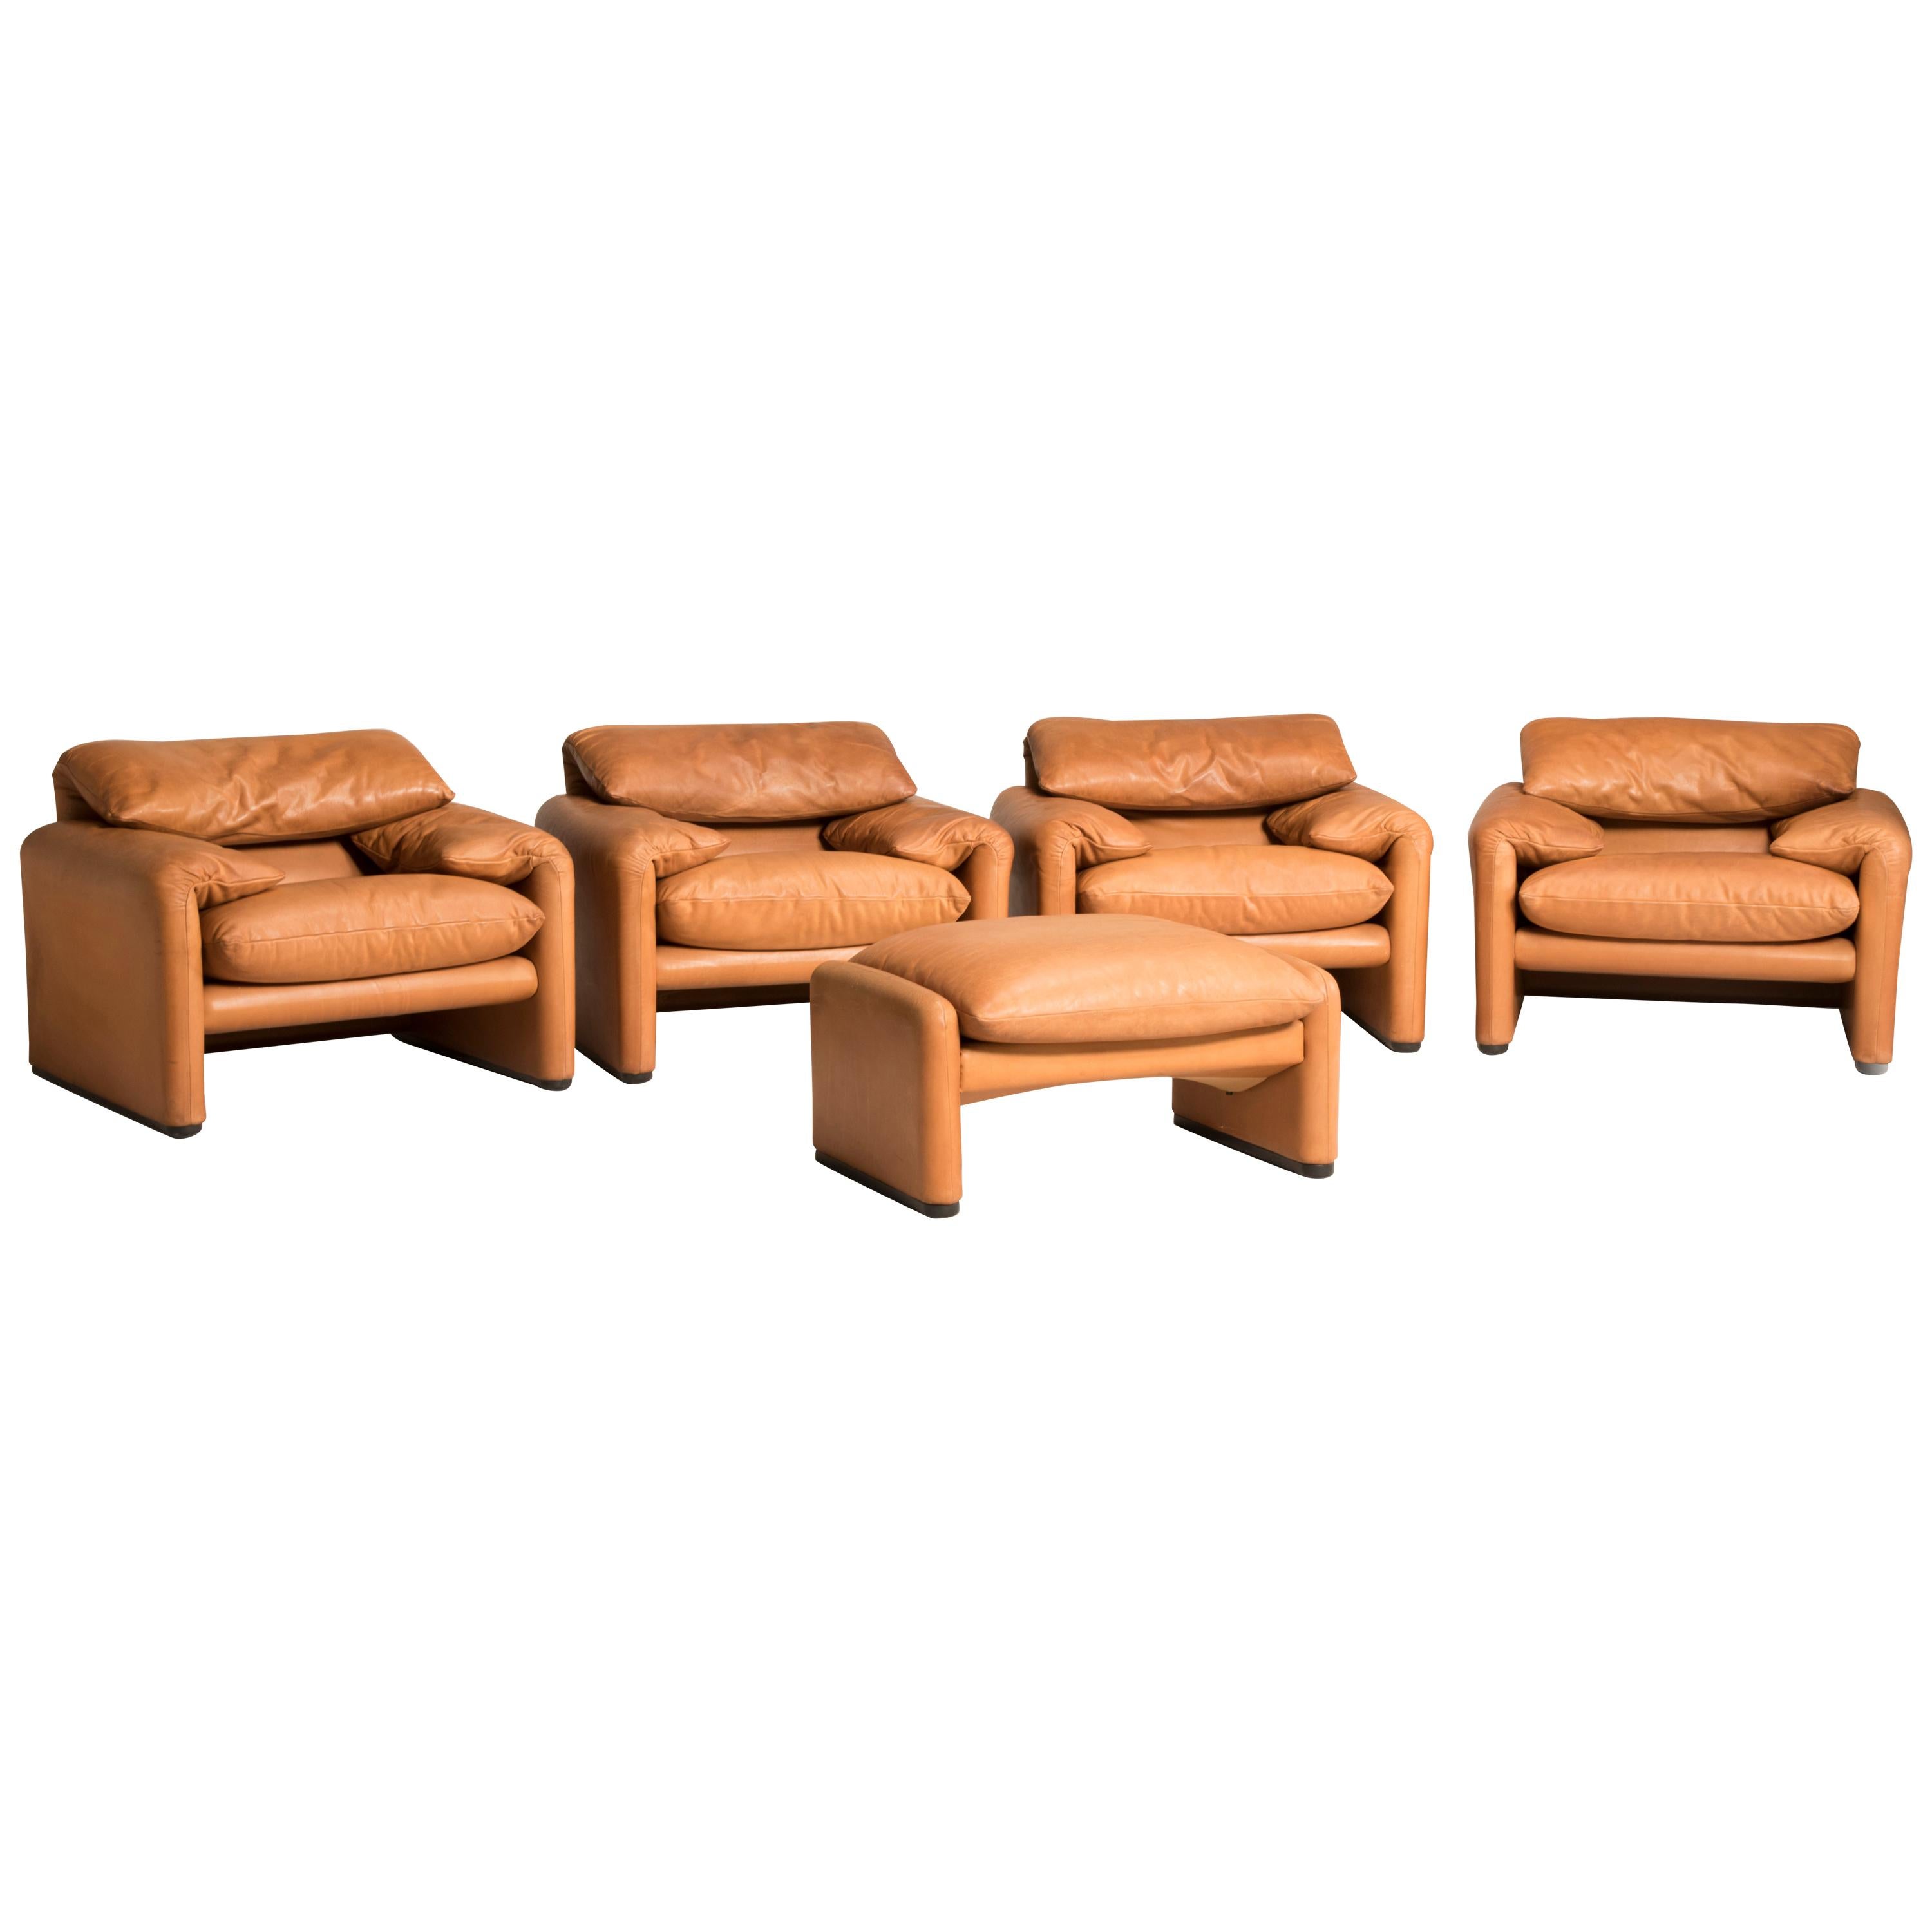 Three 675 Maralunga tobacco leather armchairs by Vico Magistretti for Cassina.
Three armchairs are available, you can buy the entire group of five items or you can divide the group.
The whole set is from late 1980s, the general conditions are very